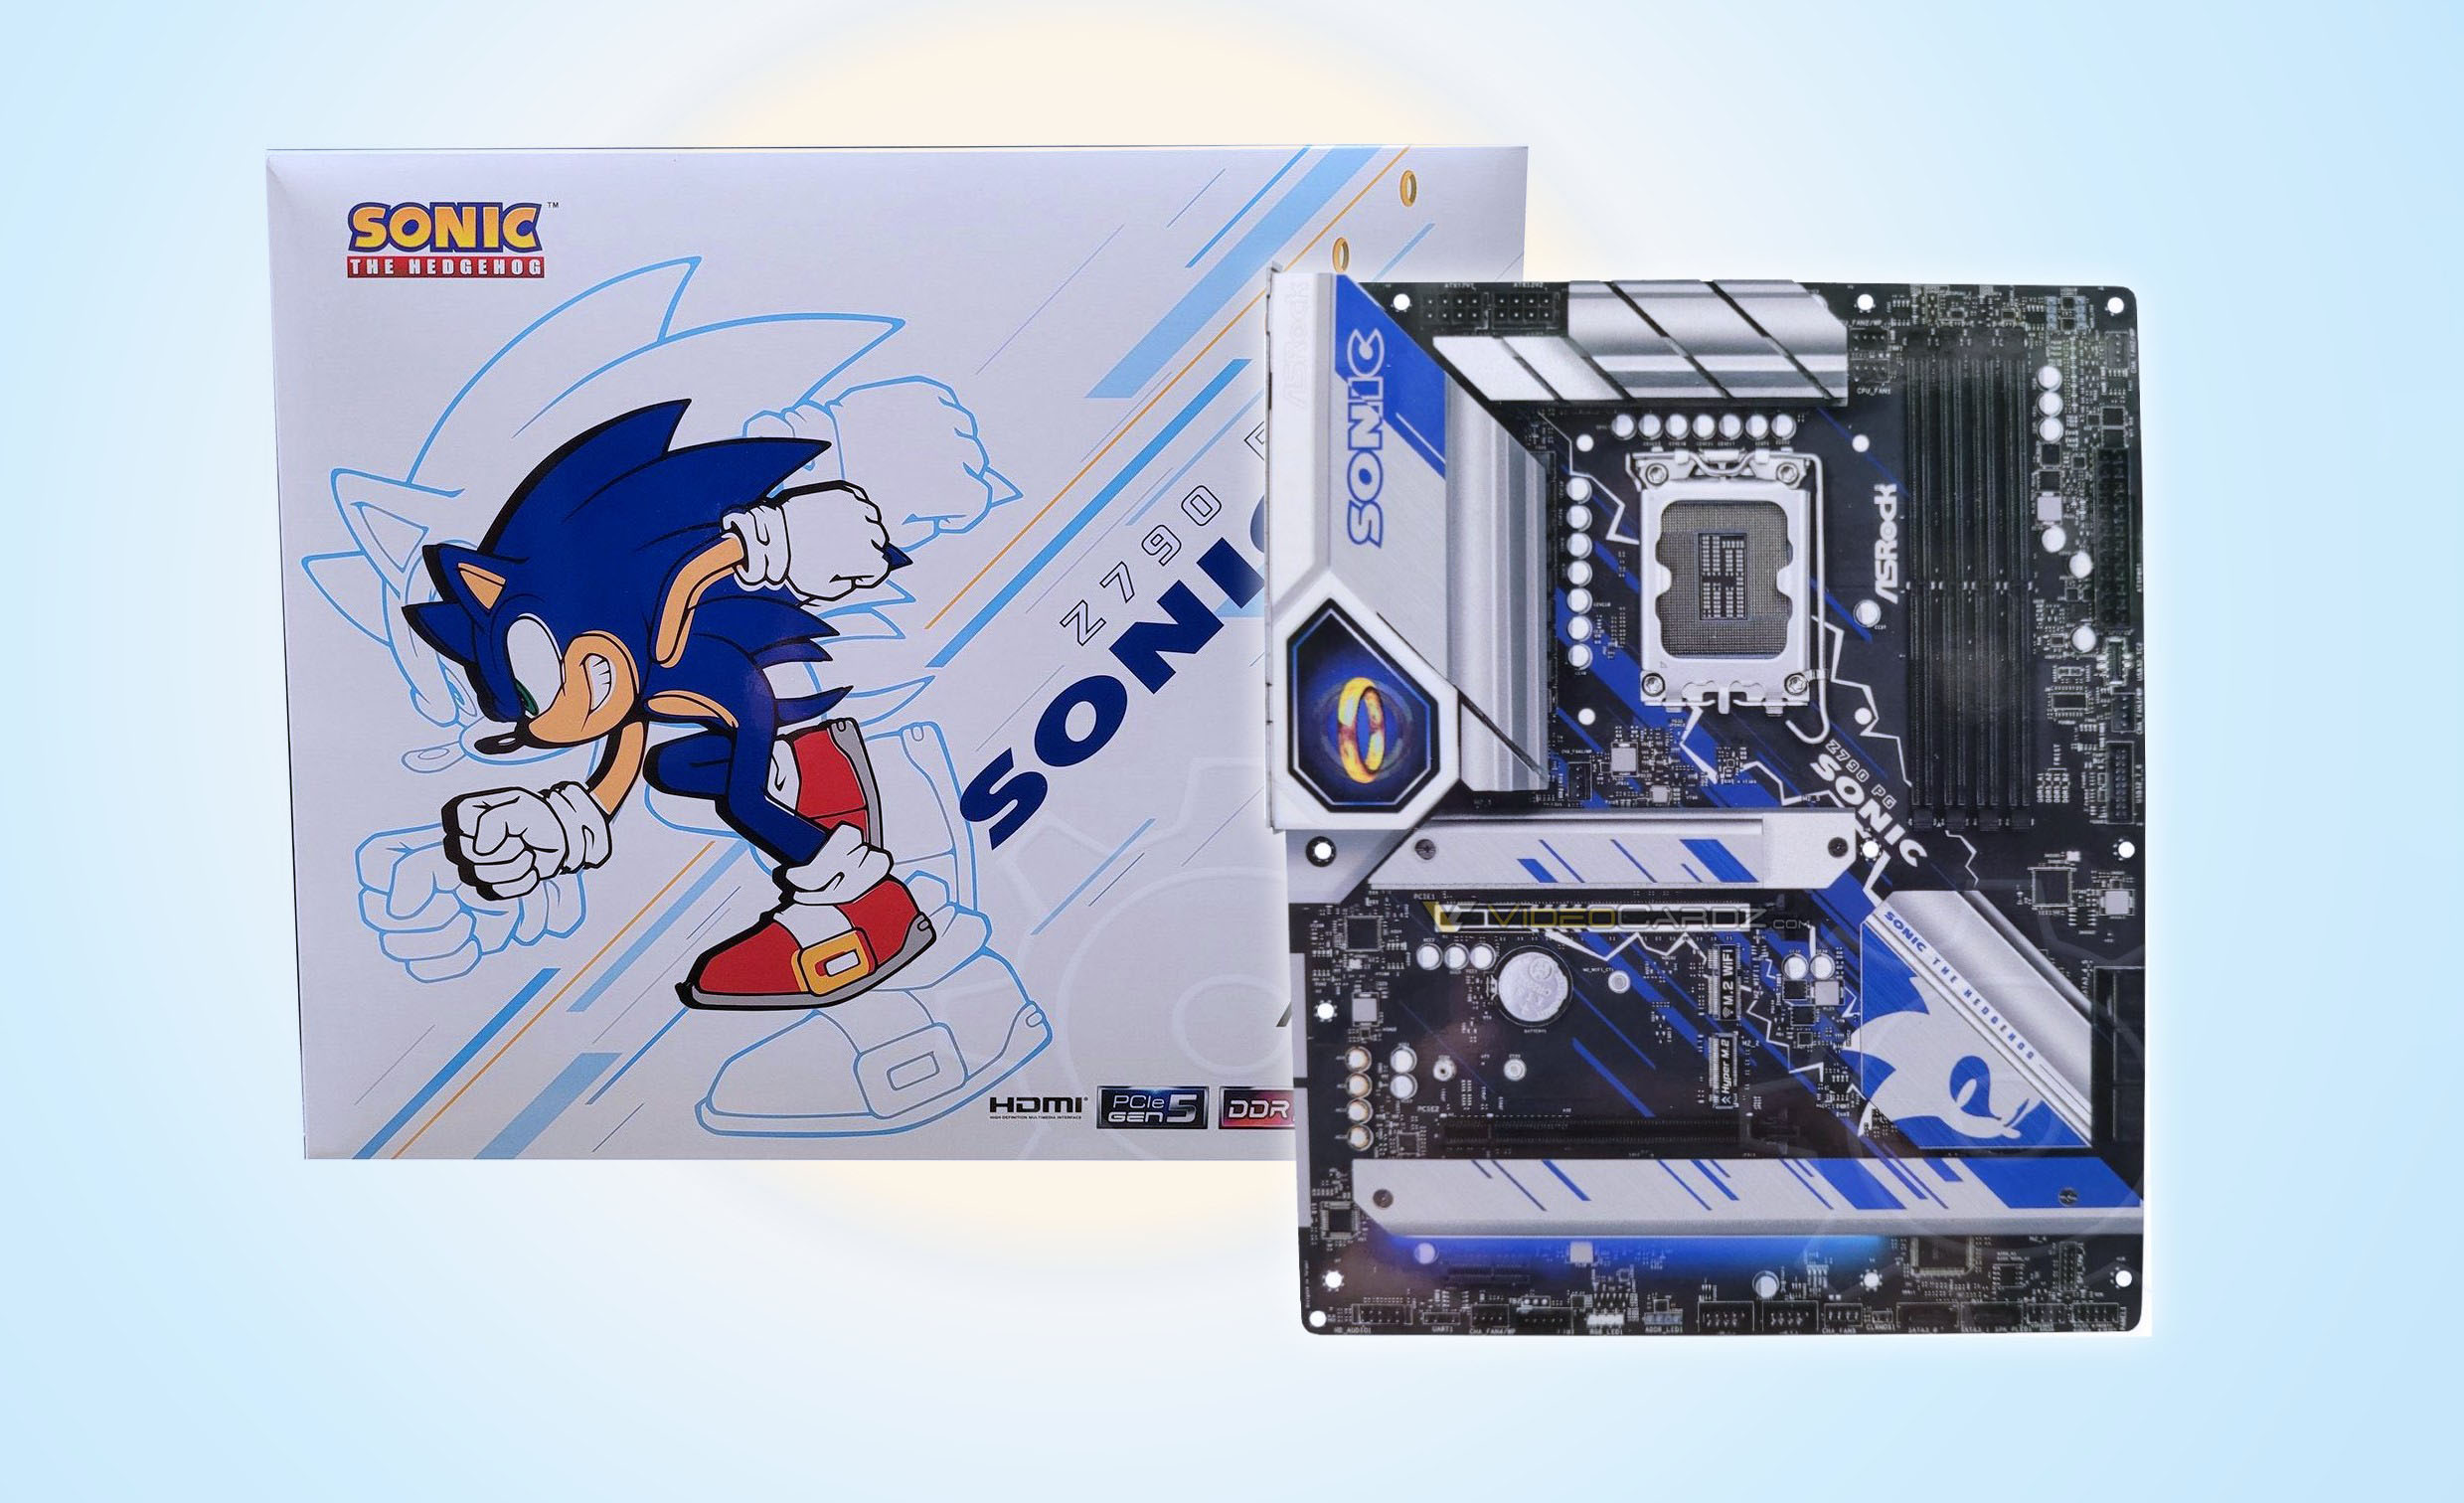 ASRock has Intel Z790 motherboard approved by Sonic the Hedgehog